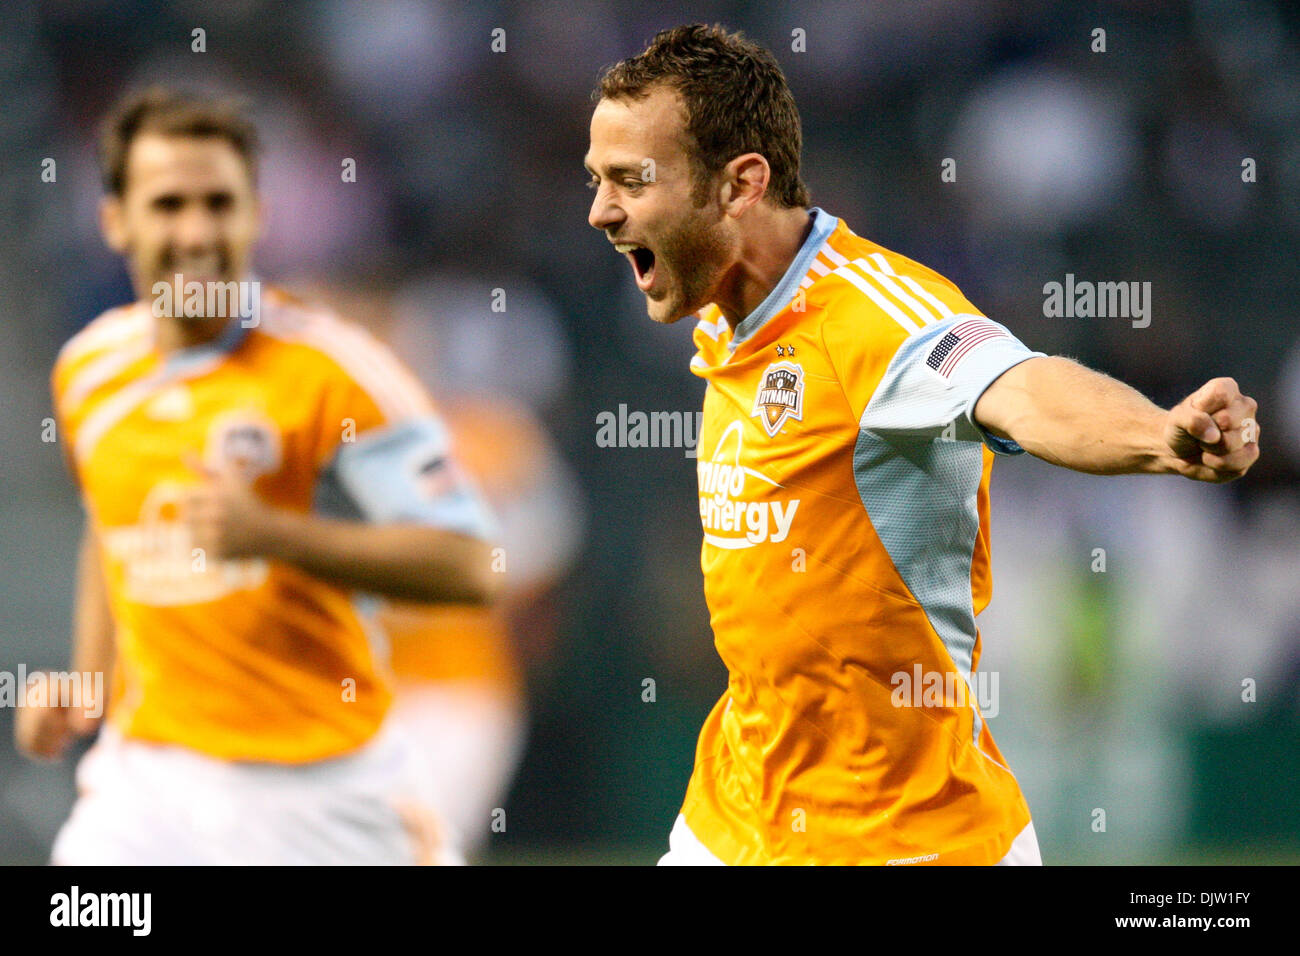 8 May 2010: Houston Dynamo M #11 Brad Davis (pictured) celebrates after scoring a chip shot goal over Chivas USA GK #22 Zach Thornton in the opening minutes of the Chivas USA vs the Houston Dynamos game at the Home Depot Center in Carson, California. Chivas went on to be defeated by the Dynamo with a final score of 0-2. Mandatory Credit: Brandon Parry / Southcreek Global (Credit Im Stock Photo